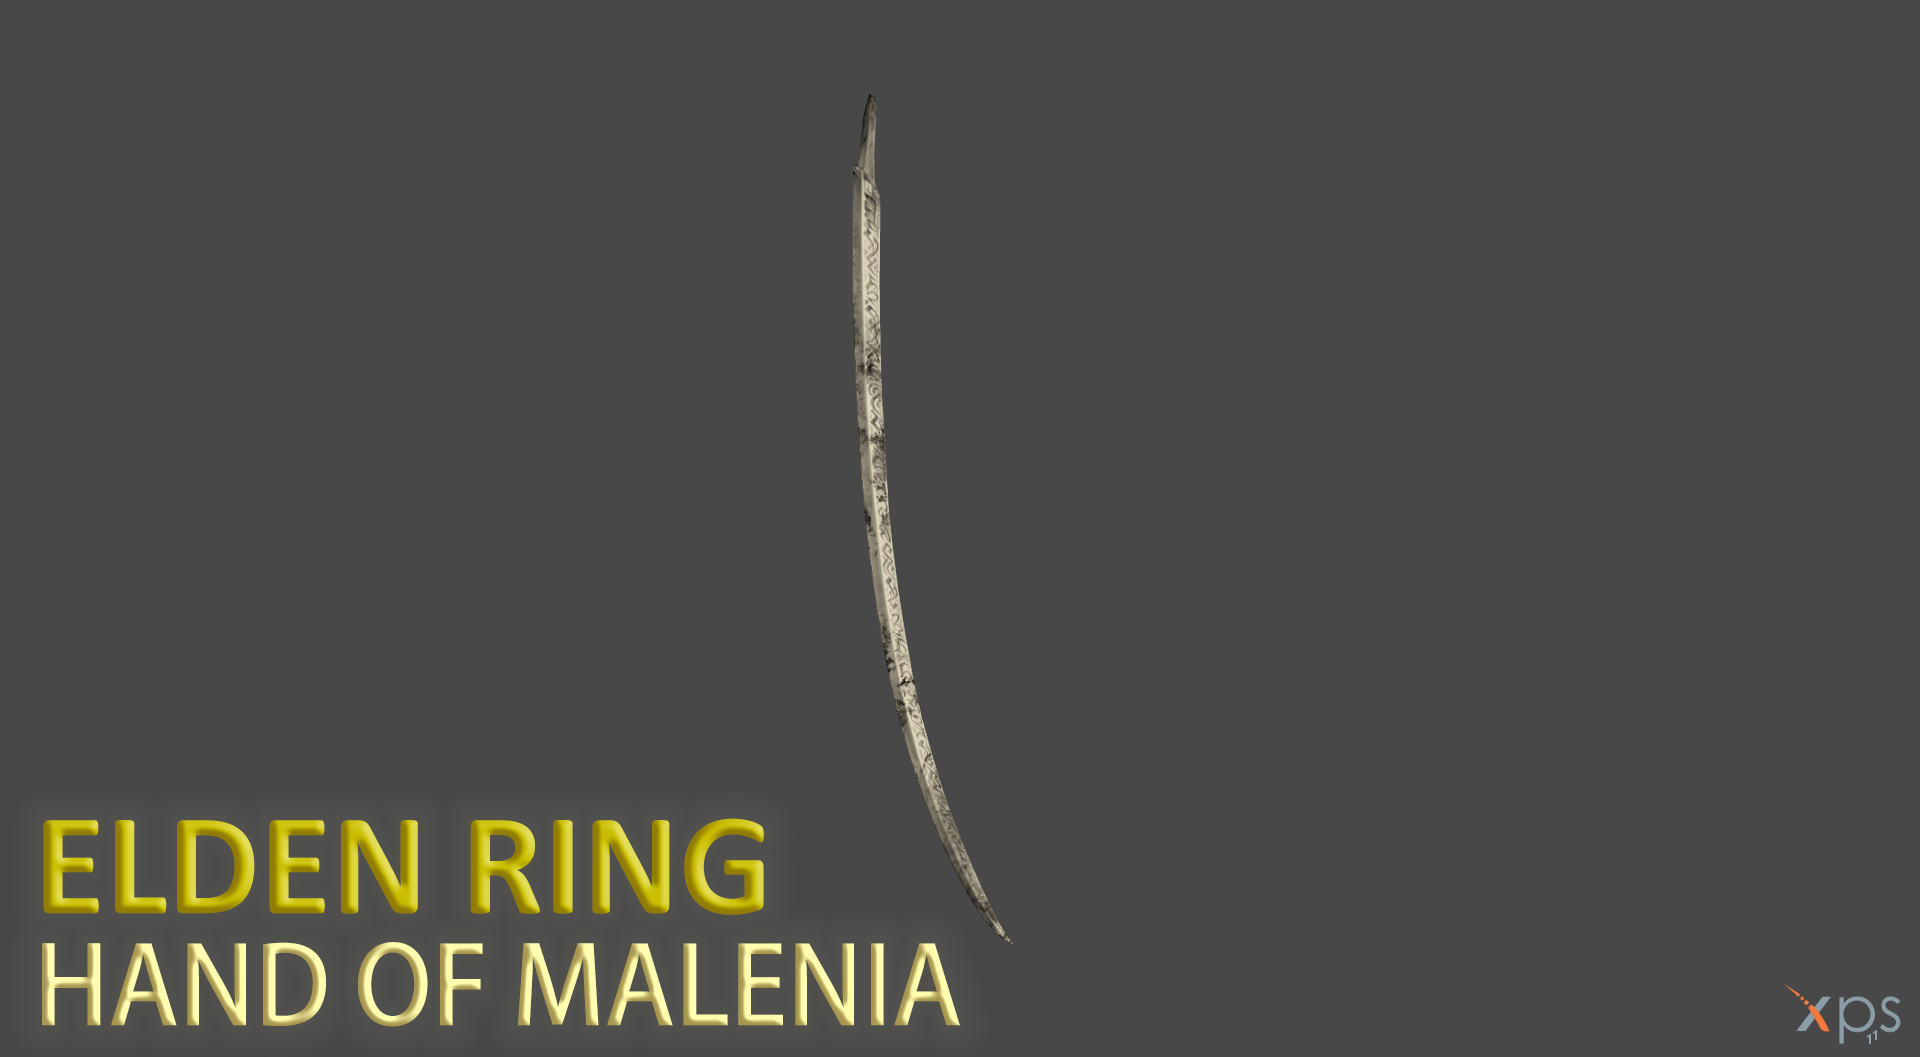 How to get the Hand of Malenia in Elden Ring